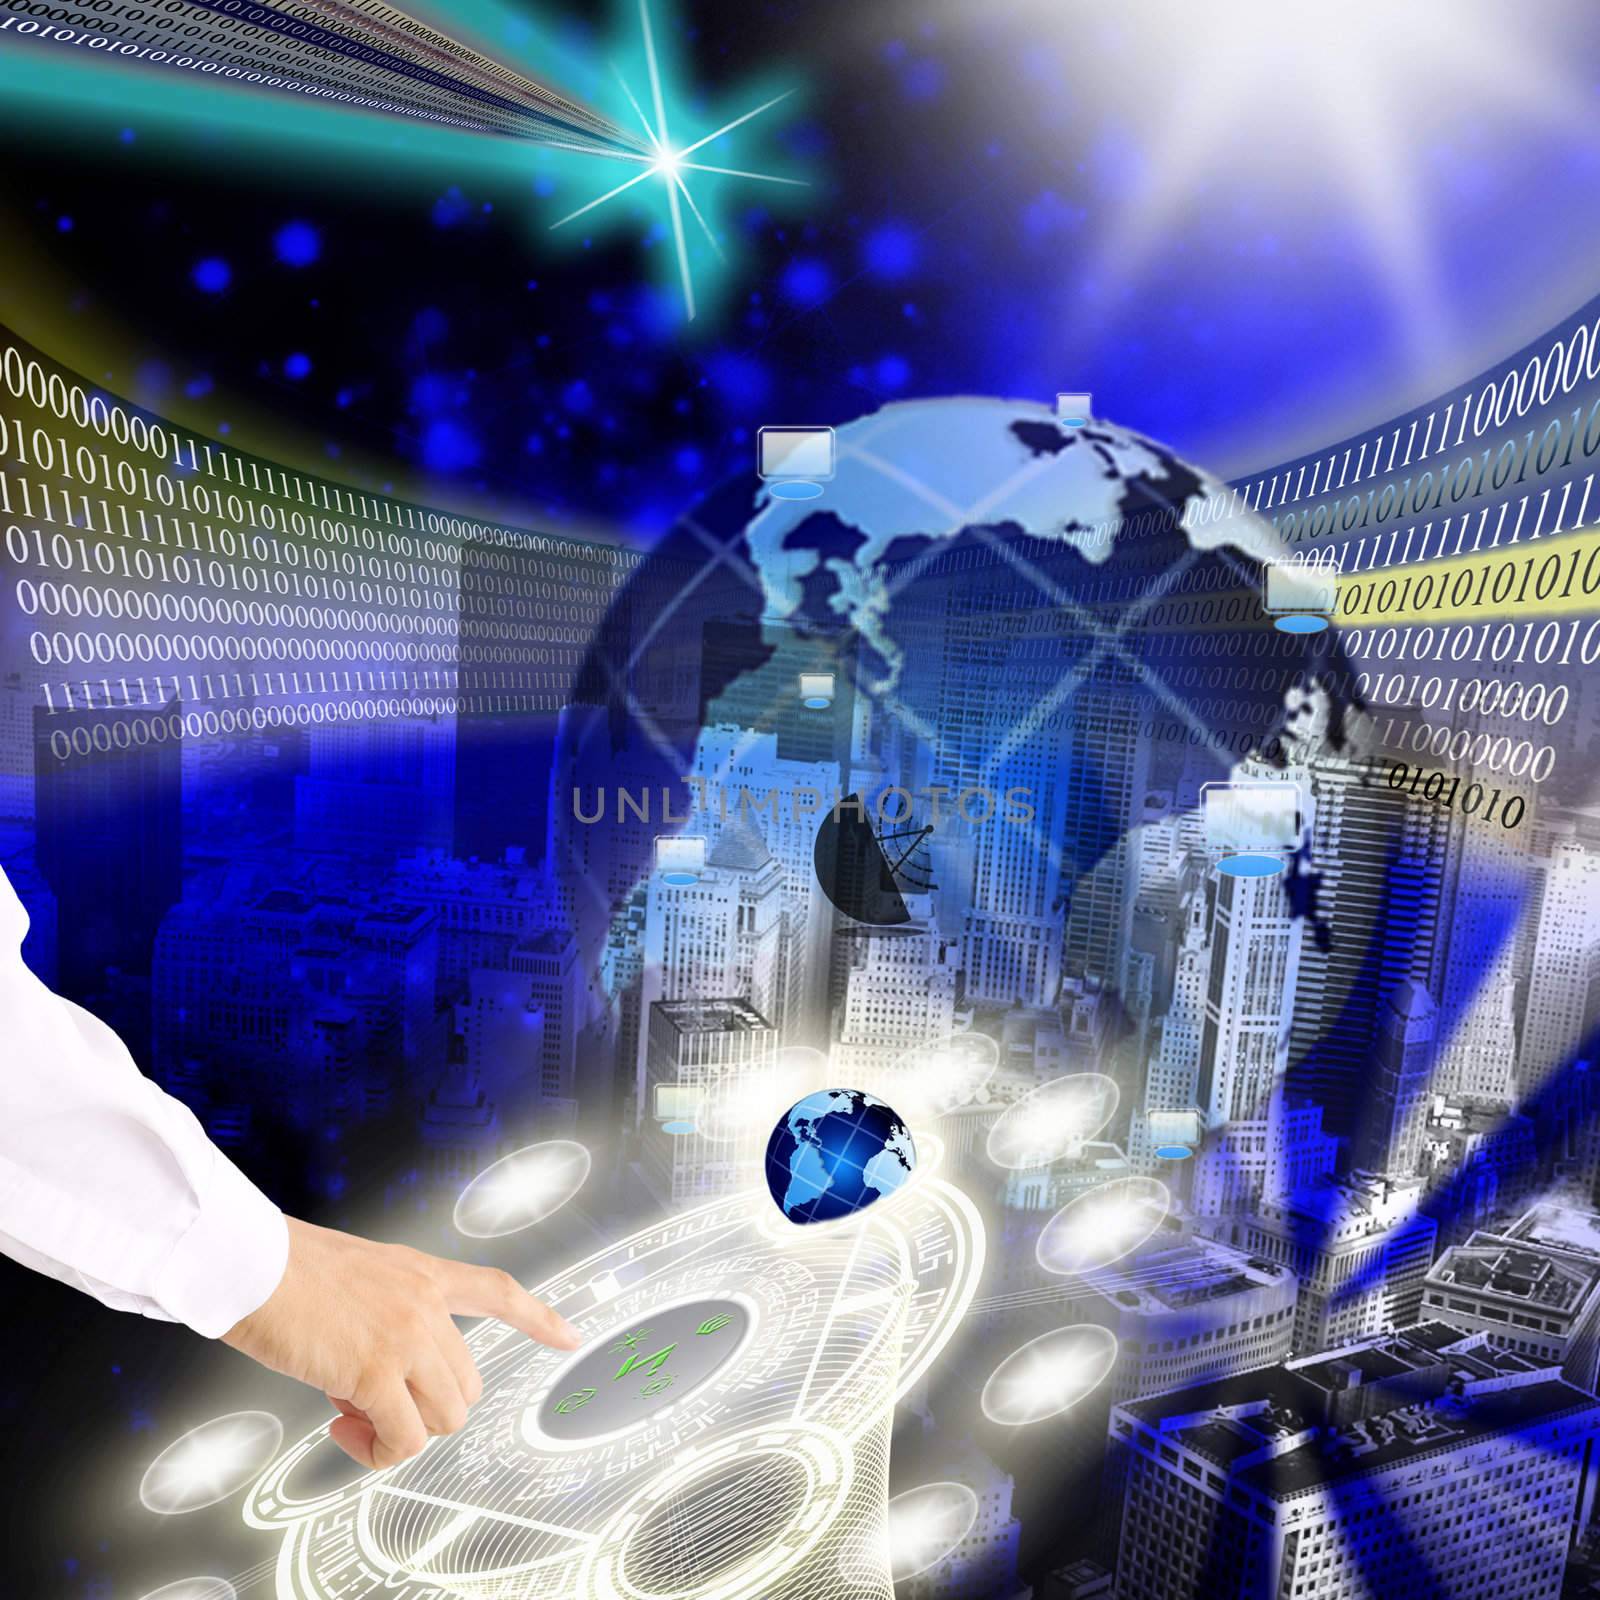 The newest the technology Internet are created in scientific laboratories and institutes